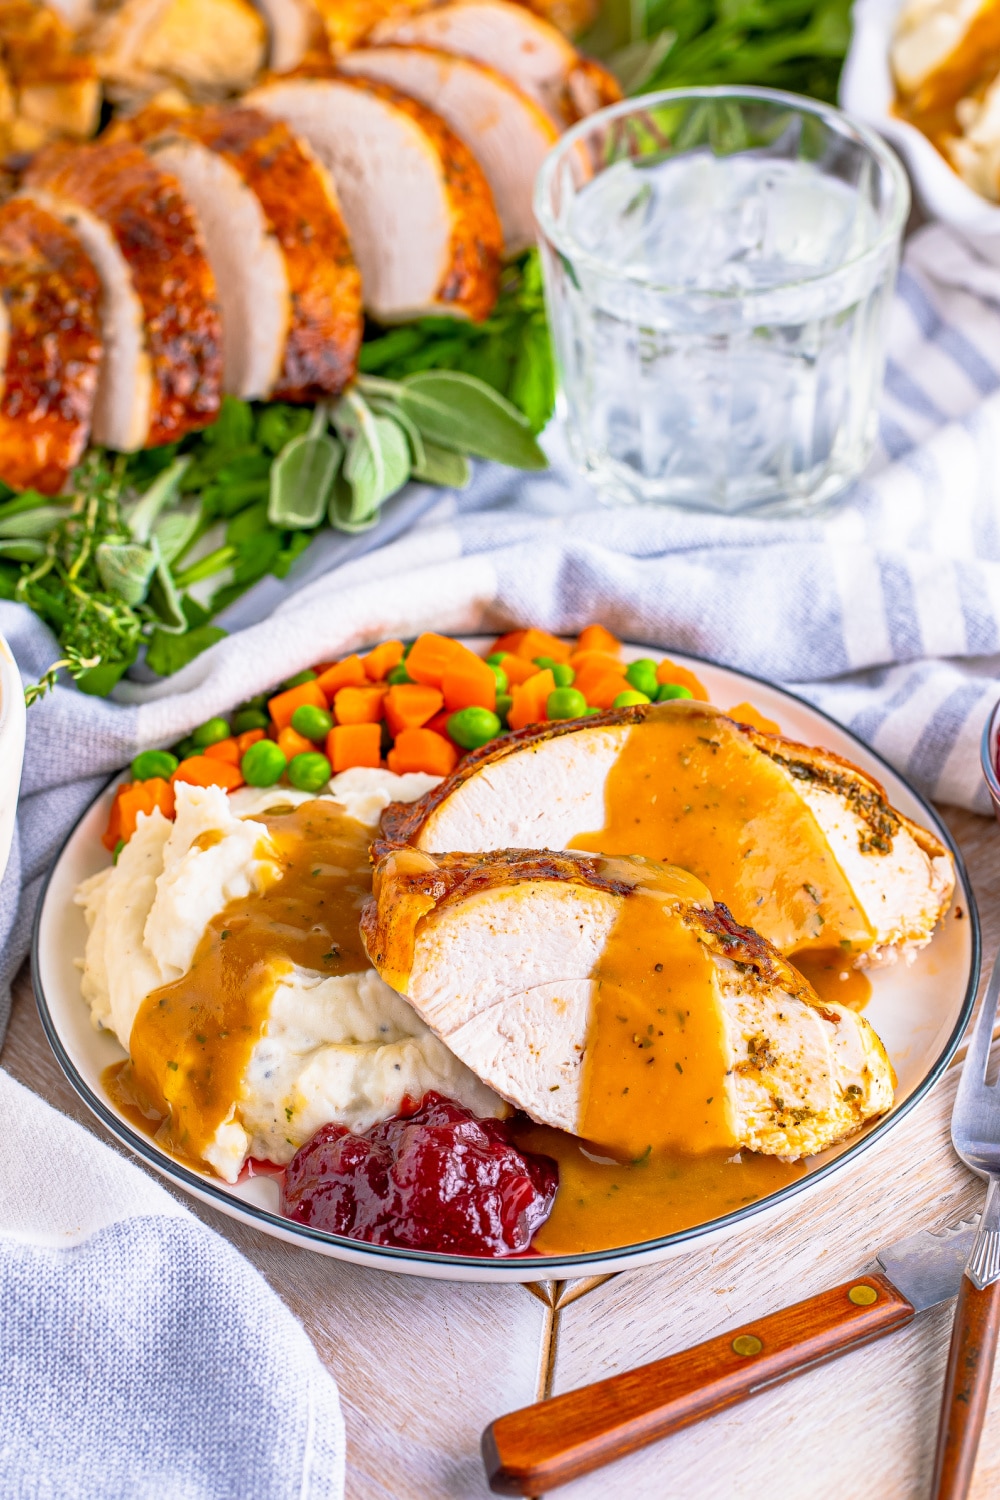 Slices of turkey on a plate with mashed potatoes dried with gravy.